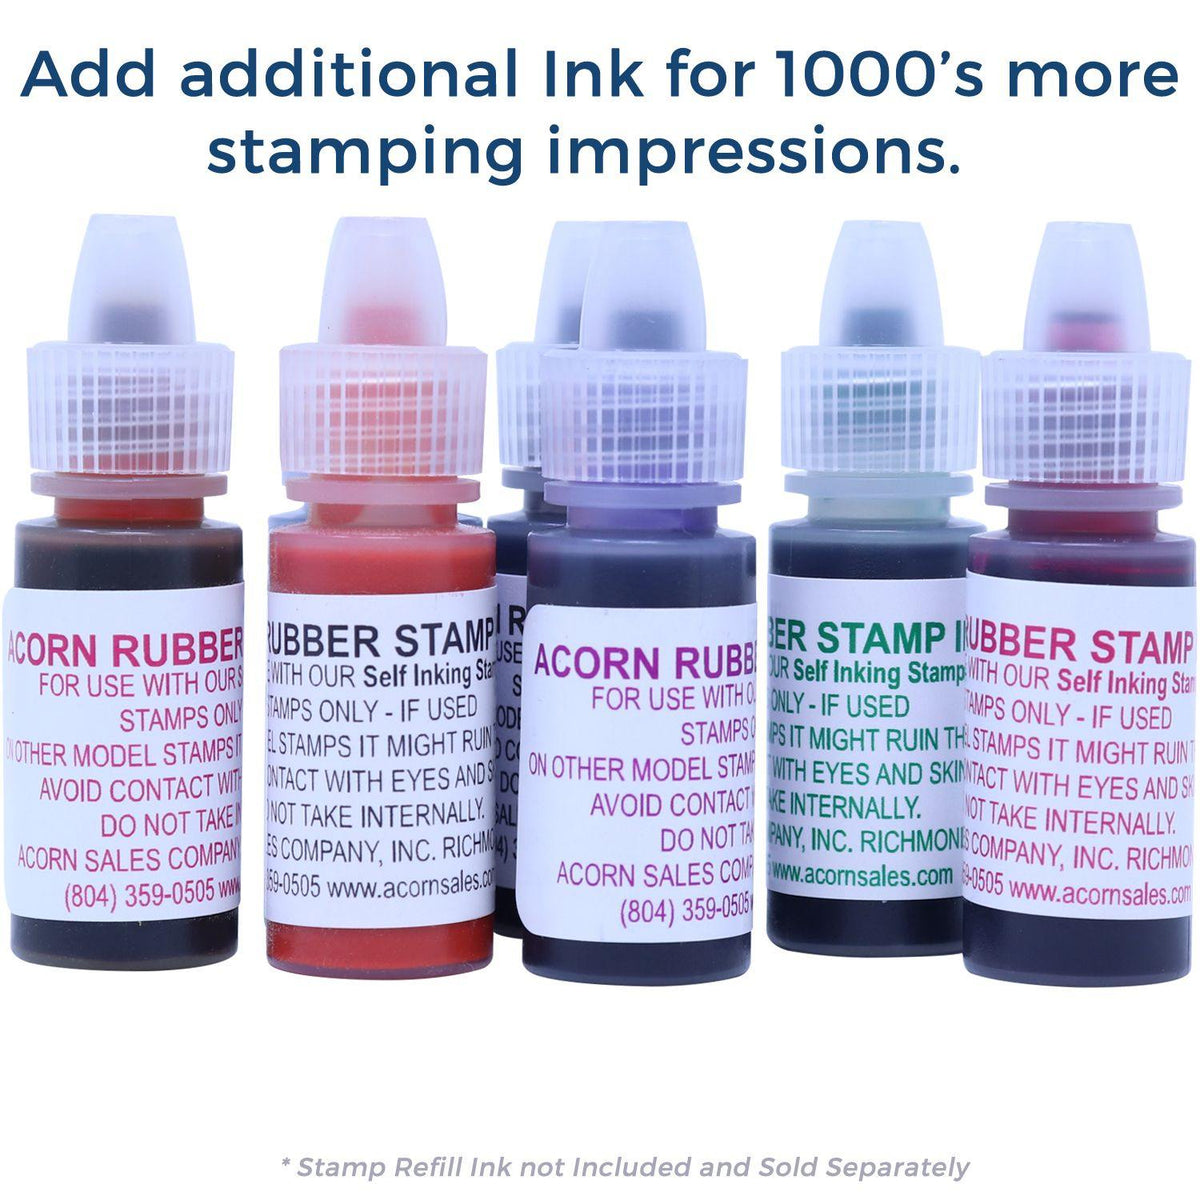 Refill Inks for Large Pre-Inked Despachado Stamp Available